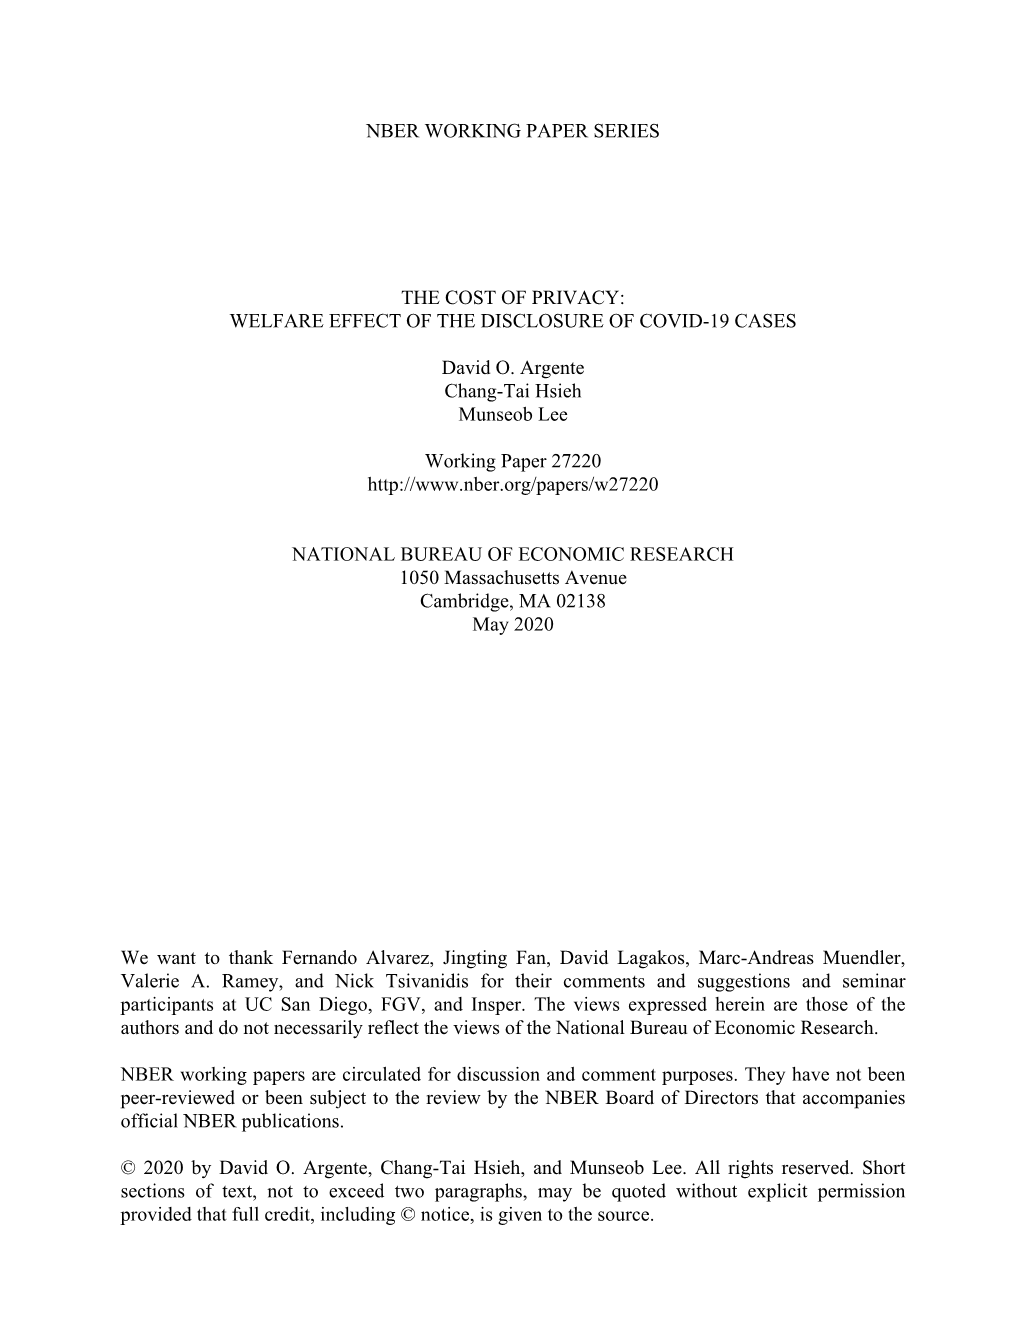 Nber Working Paper Series the Cost of Privacy